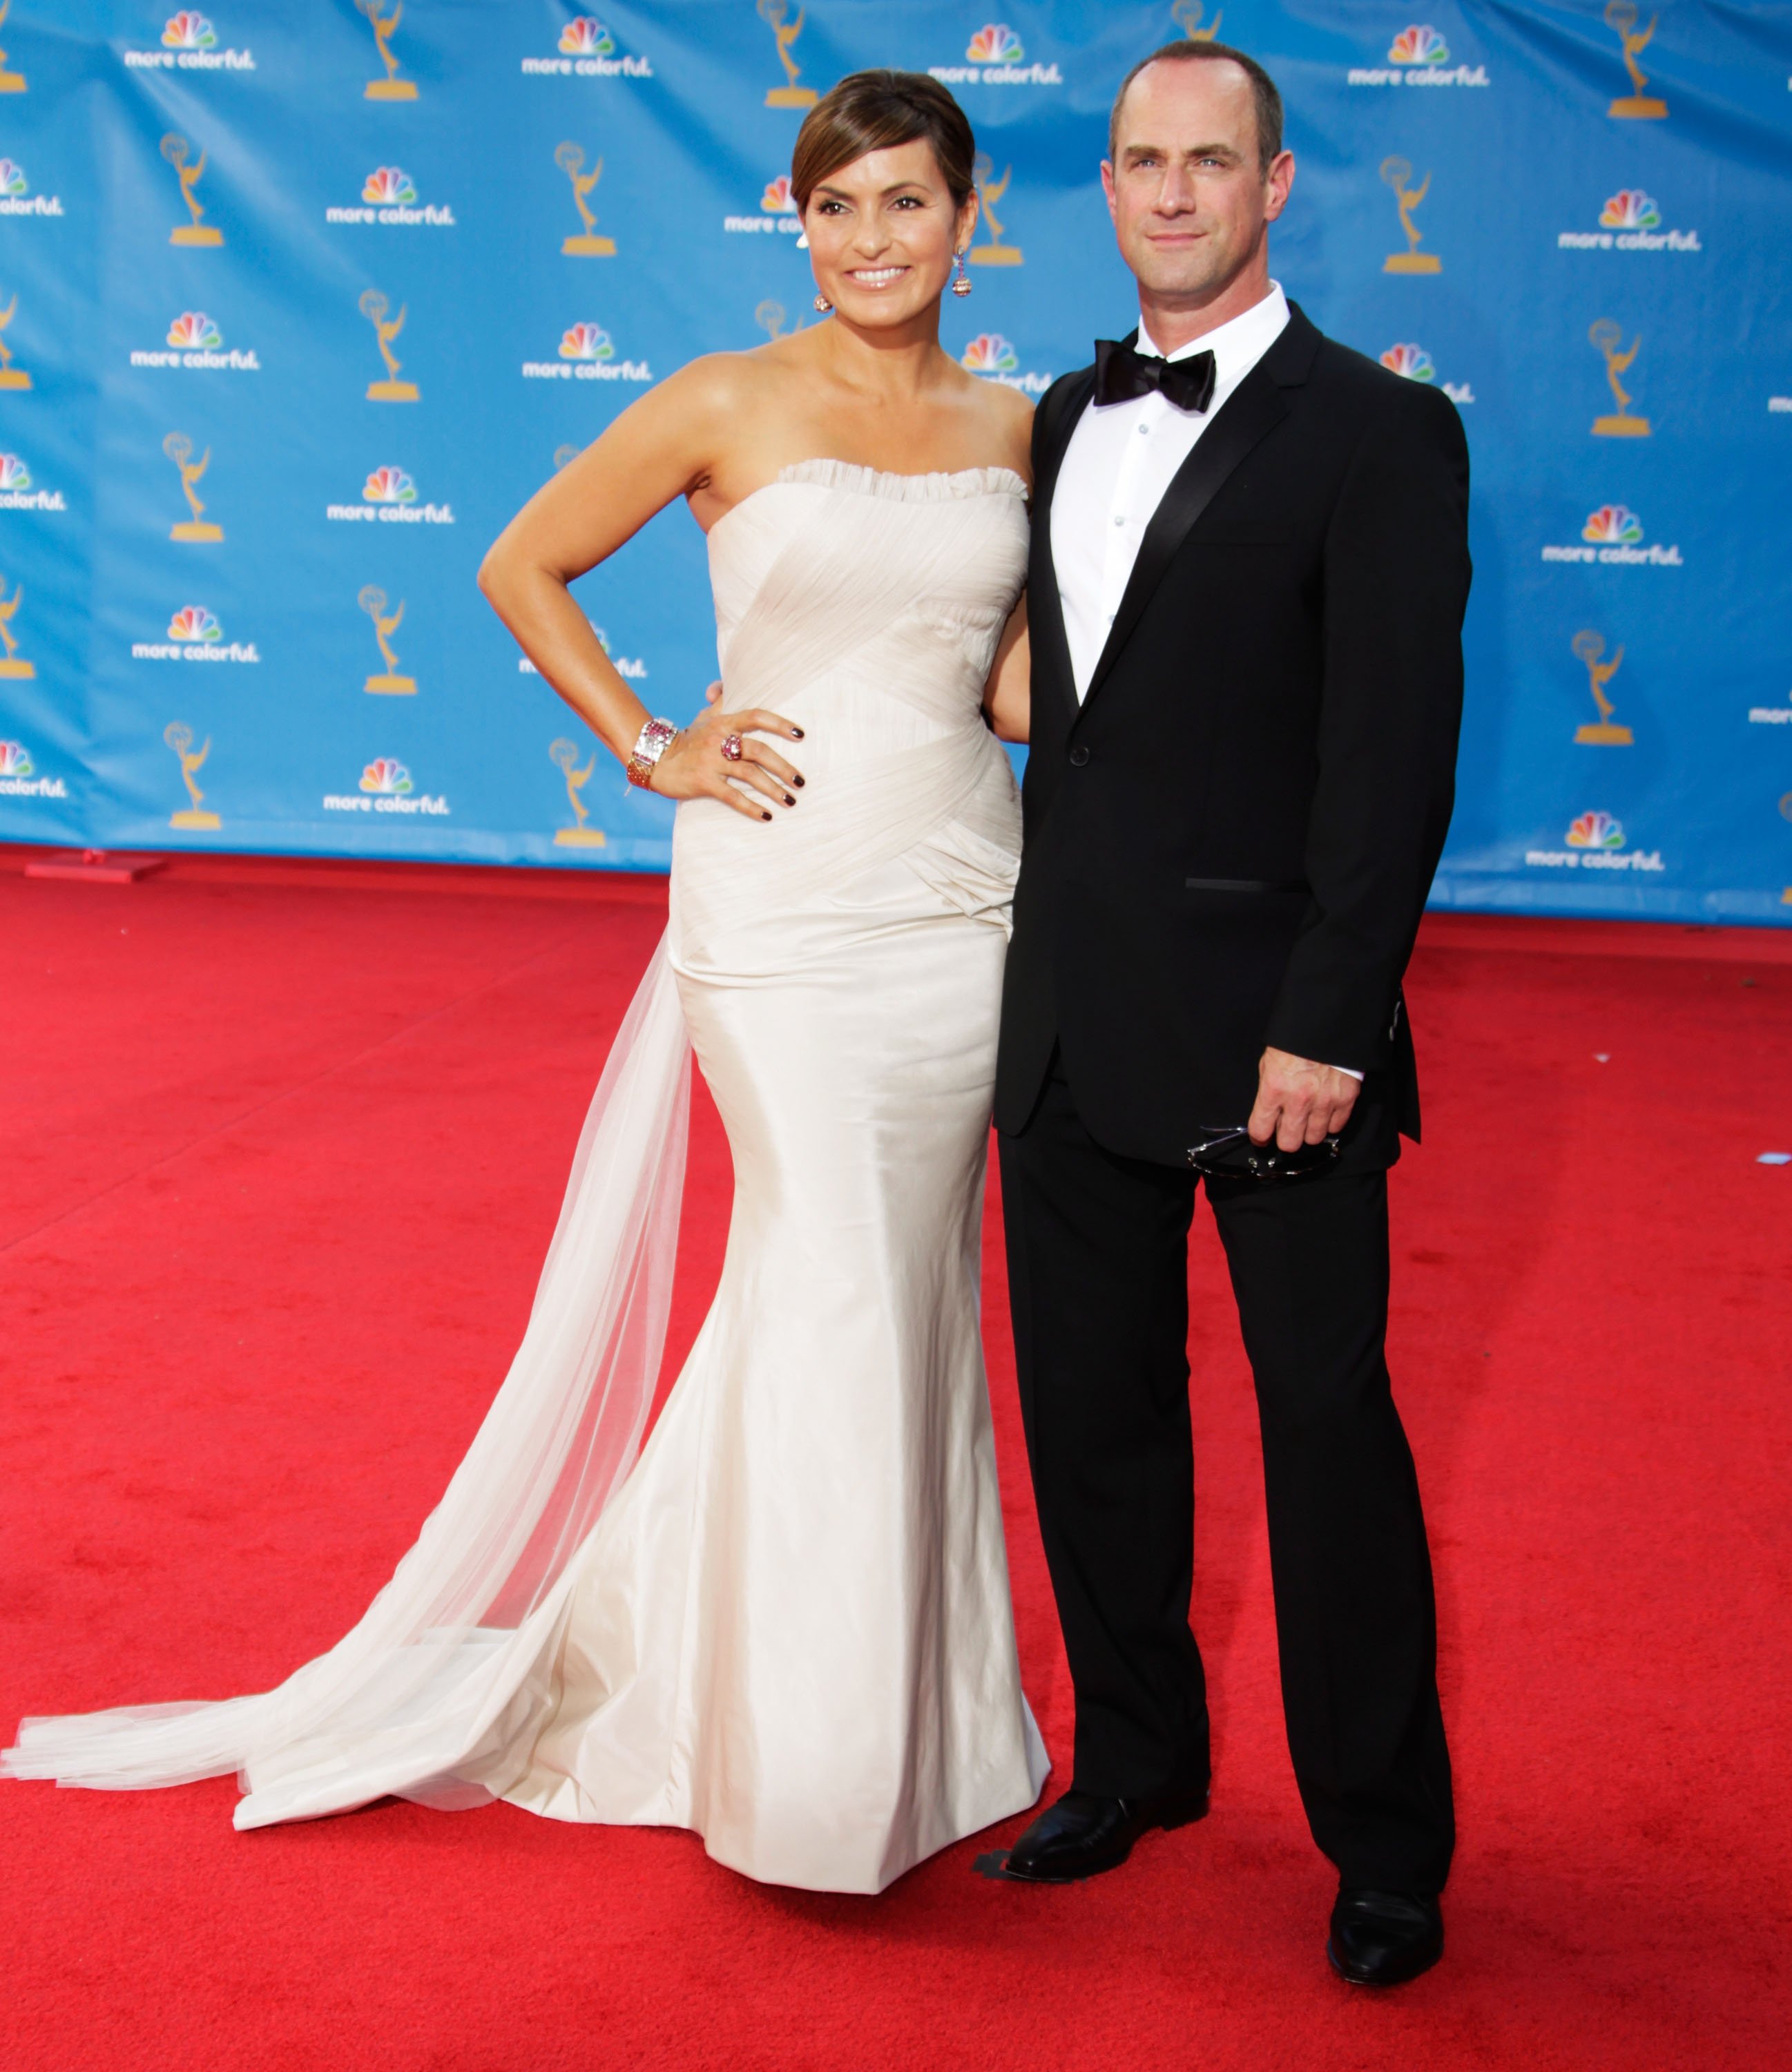 Mariska Hargitay and Christopher Meloni arrives at the 62nd Annual Primetime Emmy Awards held at the Nokia Theatre L.A. Live on August 29, 2010  | Photo: GettyImages